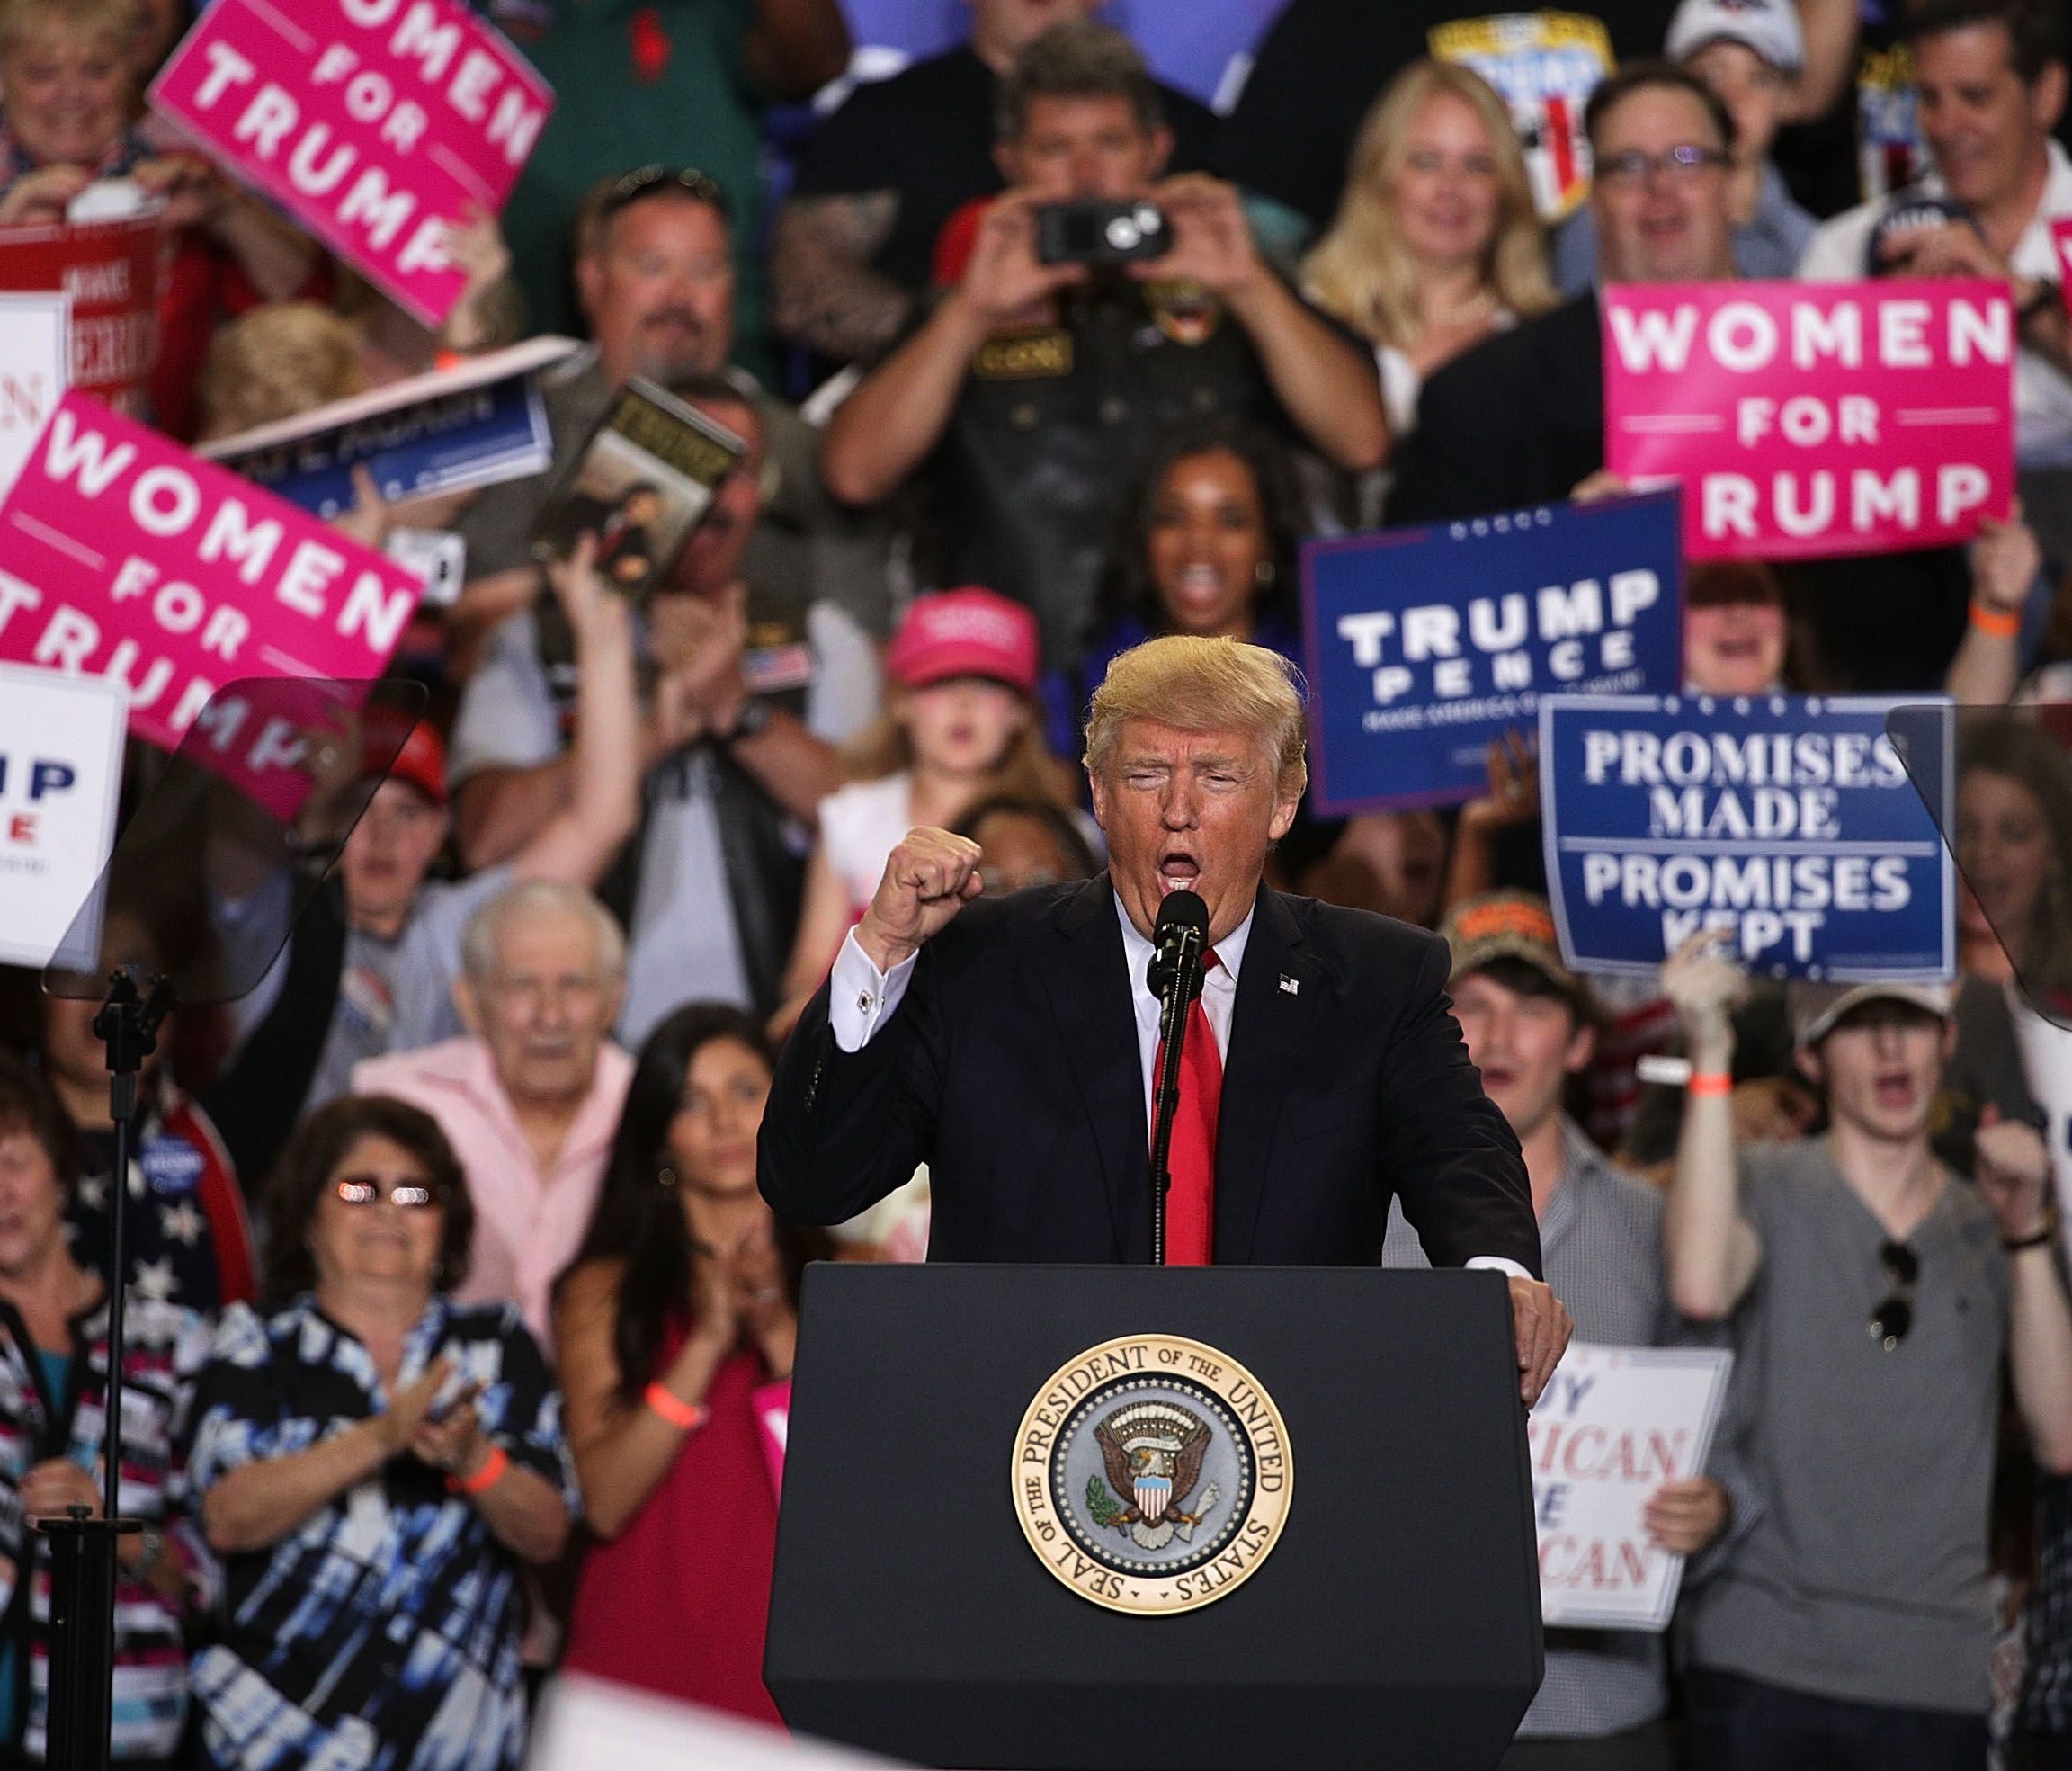 President Trump at a rally on April 29,2017.